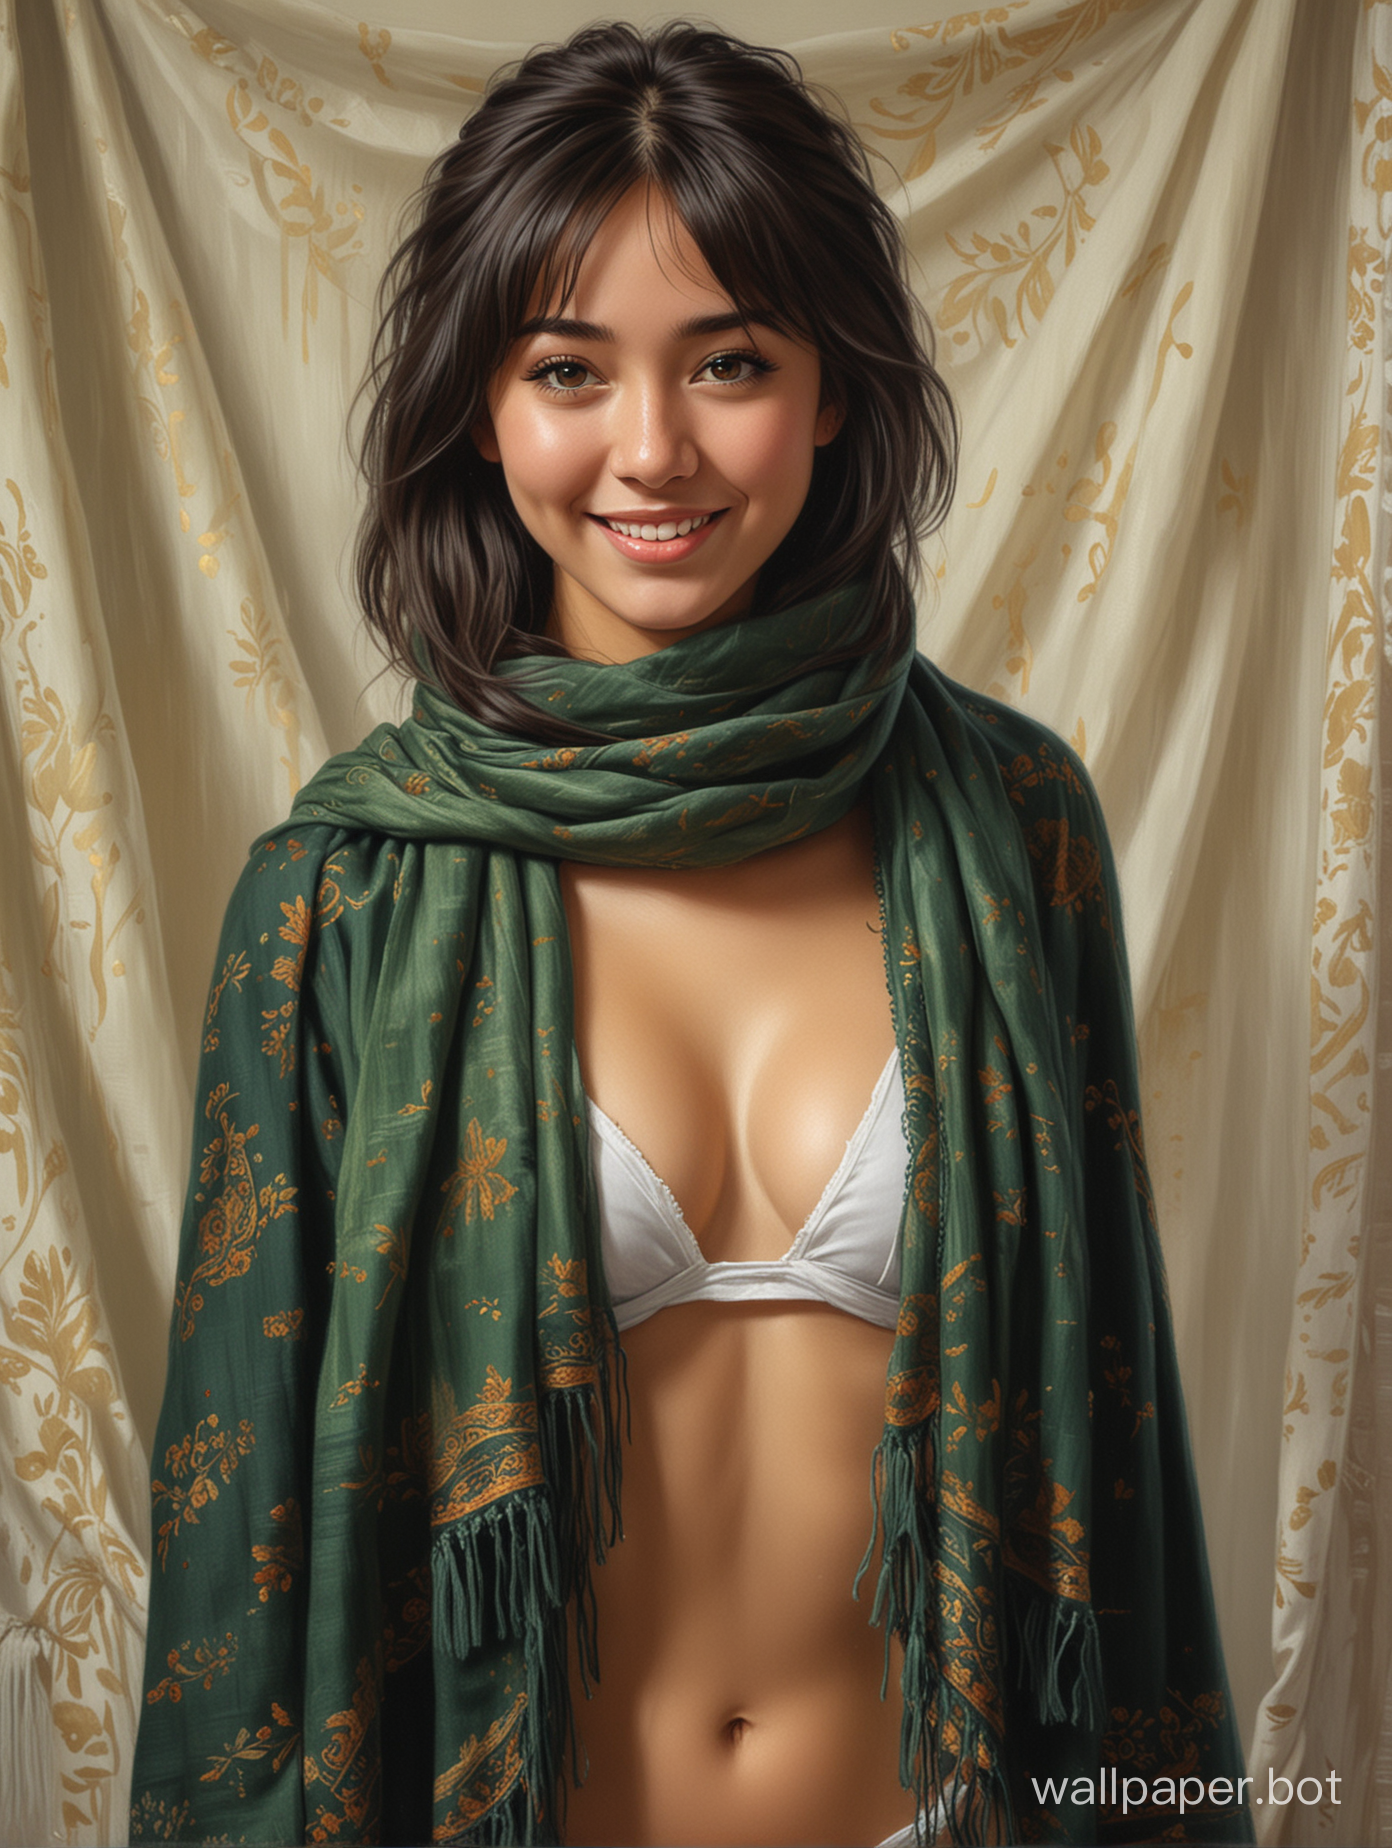 full body perspective, painting of an adorable 18 year old kazakh girl, turkic, she is pretty, she is naked, she has amber eyes, she has tan skin, she has long jet-black hair that is wavy and falls in curtains, fluffy blunt bangs, nose piercing, midriff, chest, she has a beautiful innocent face, smiling, beaming, very cute, wearing a fancy forest-green shemagh scarf, perfect, sense of wonder, Velazquez painting style 